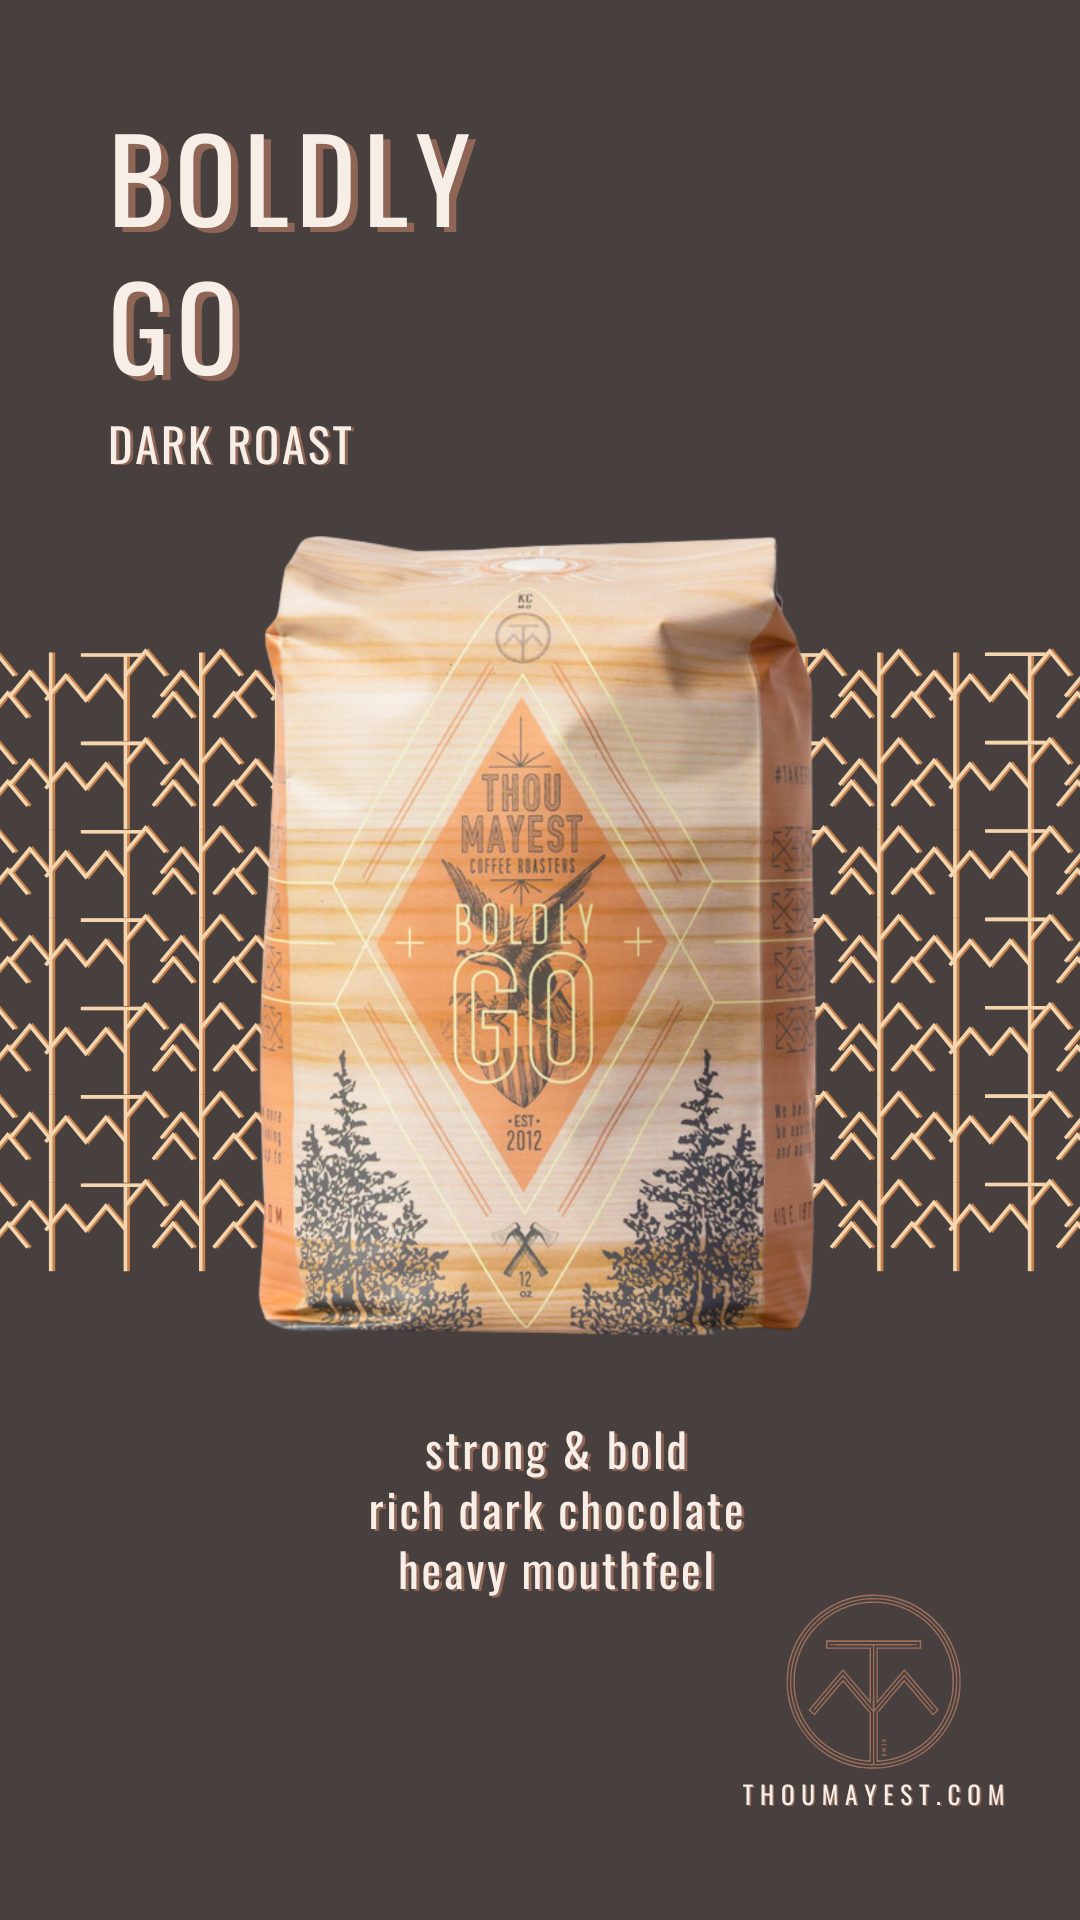 Image of Boldly Go 12oz bag of coffee with description: Dark roast. Strong &amp; Bold. Rich Dark Chocolate. Heavy Mouthfeel. 